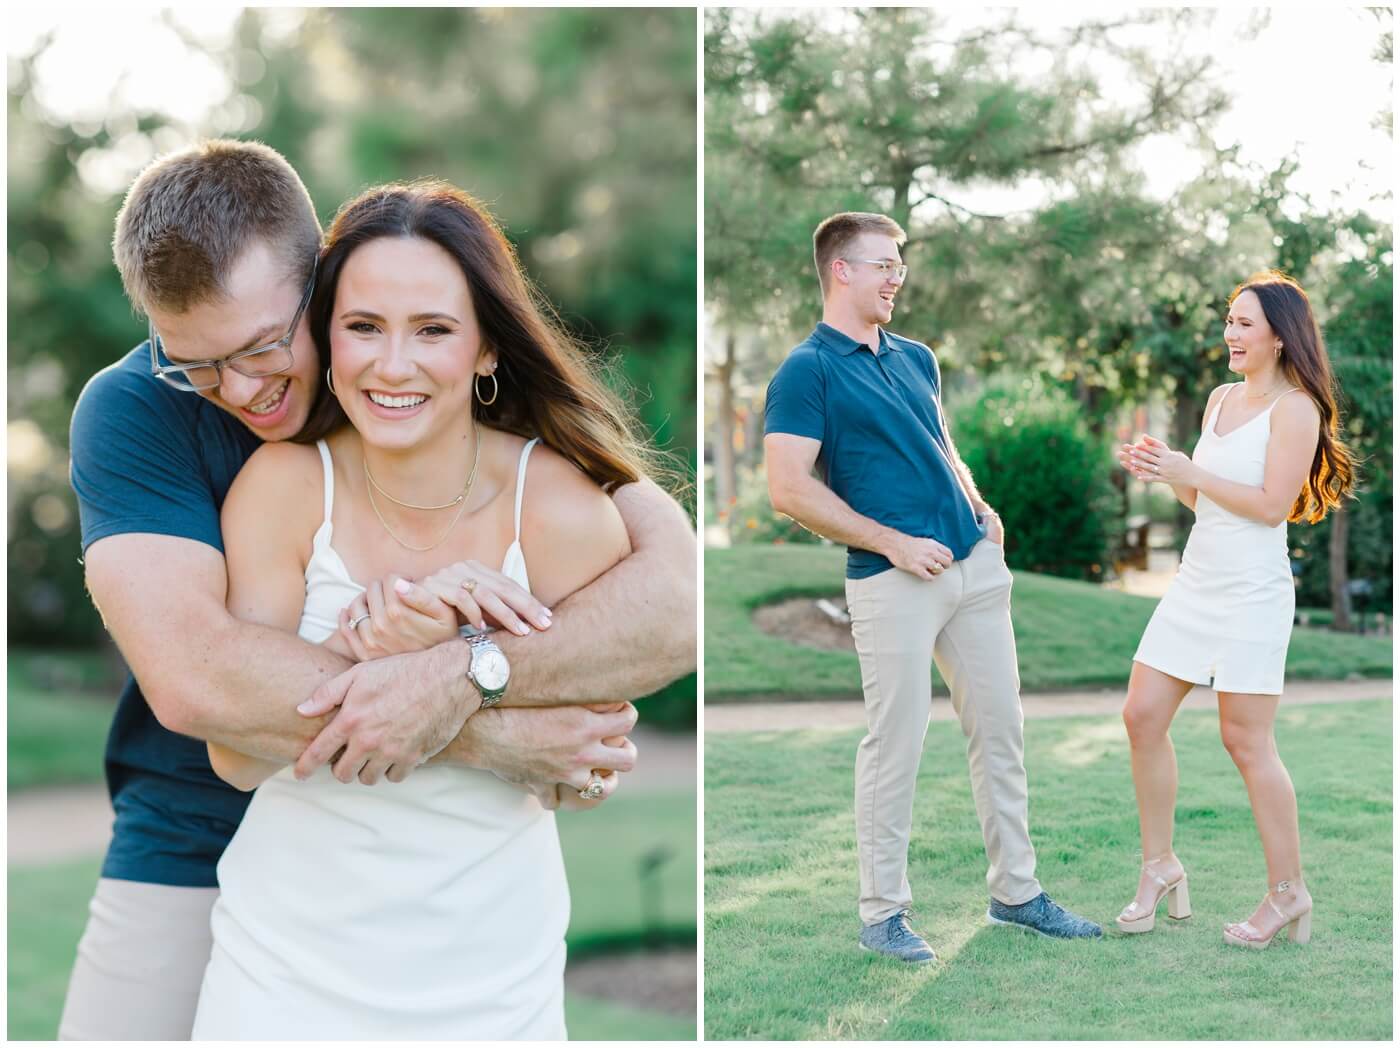 A couple laughs together during their engagement session at the TAMU Gardens.